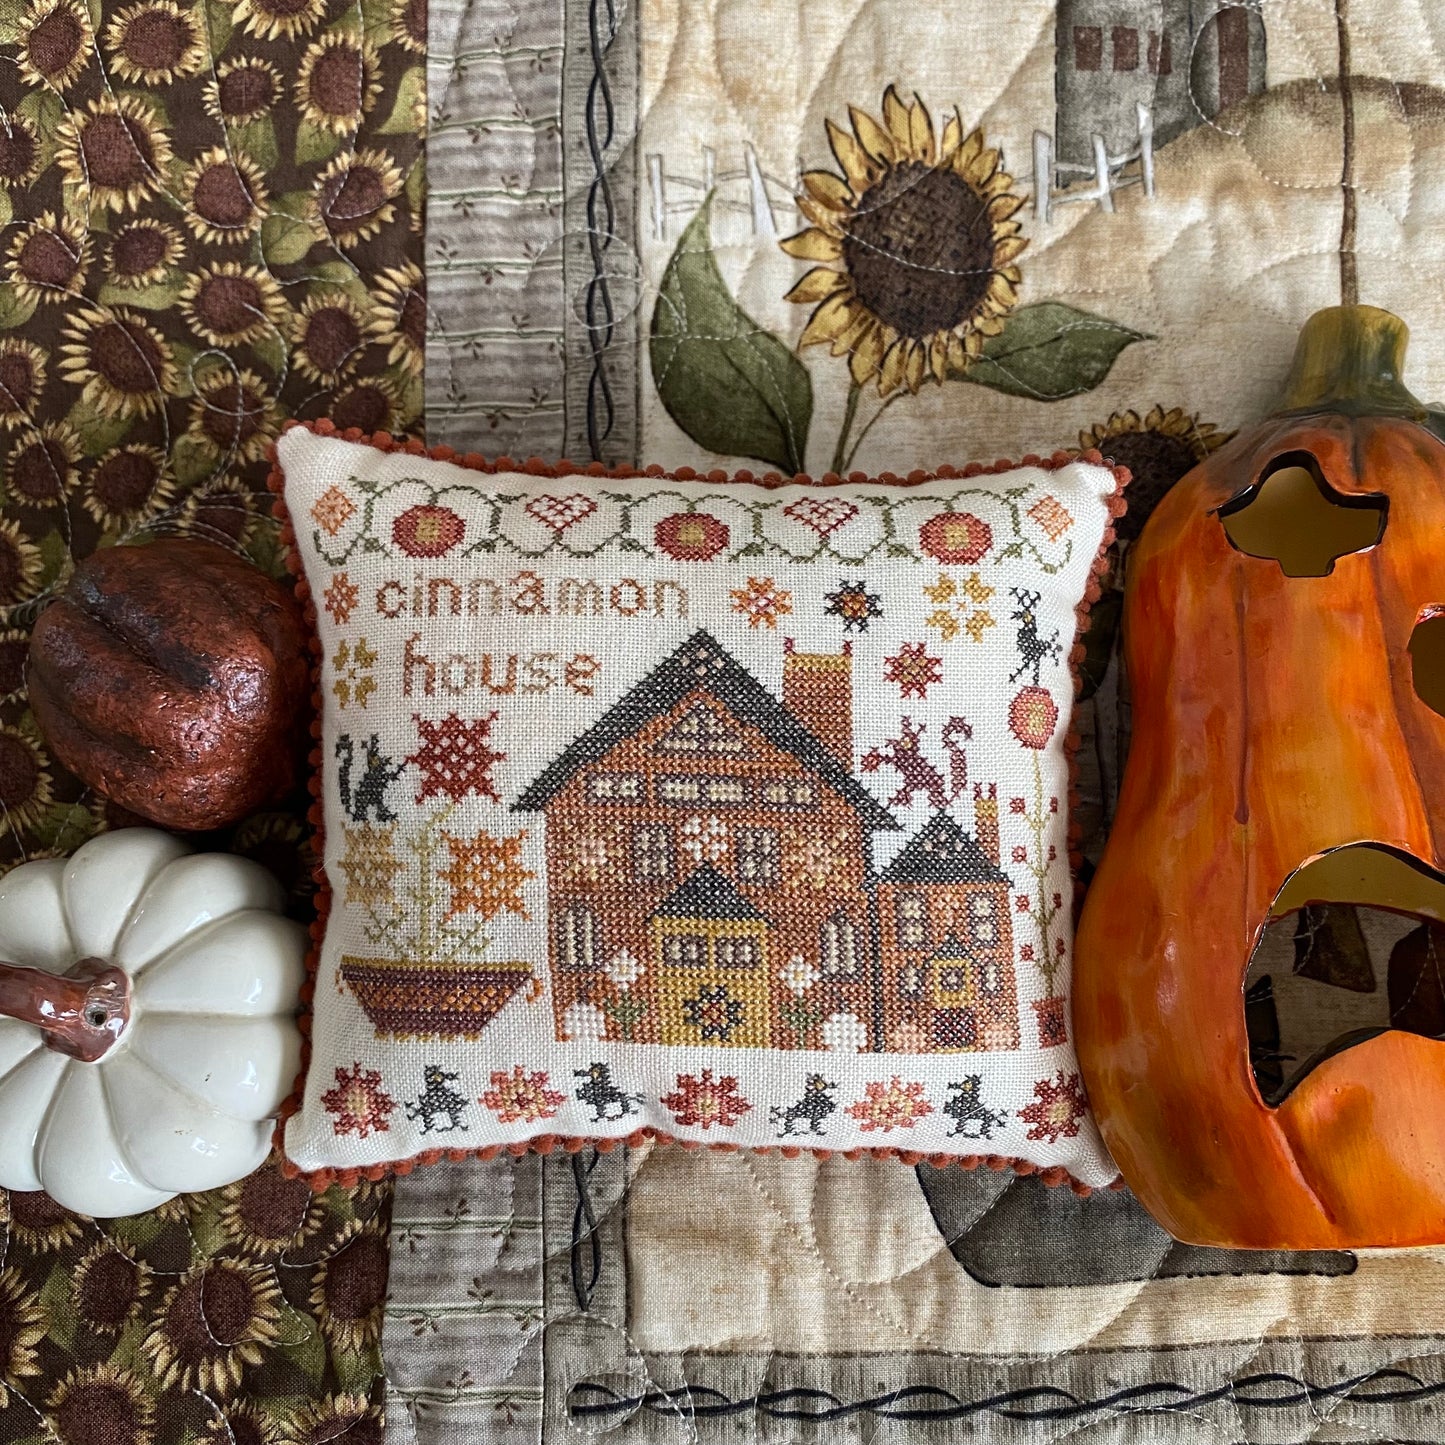 Cinnamon House - The Houses on Pumpkin Lane #7 - Pansy Patch Quilts and Stitchery, Needlecraft Patterns, The Crafty Grimalkin - A Cross Stitch Store